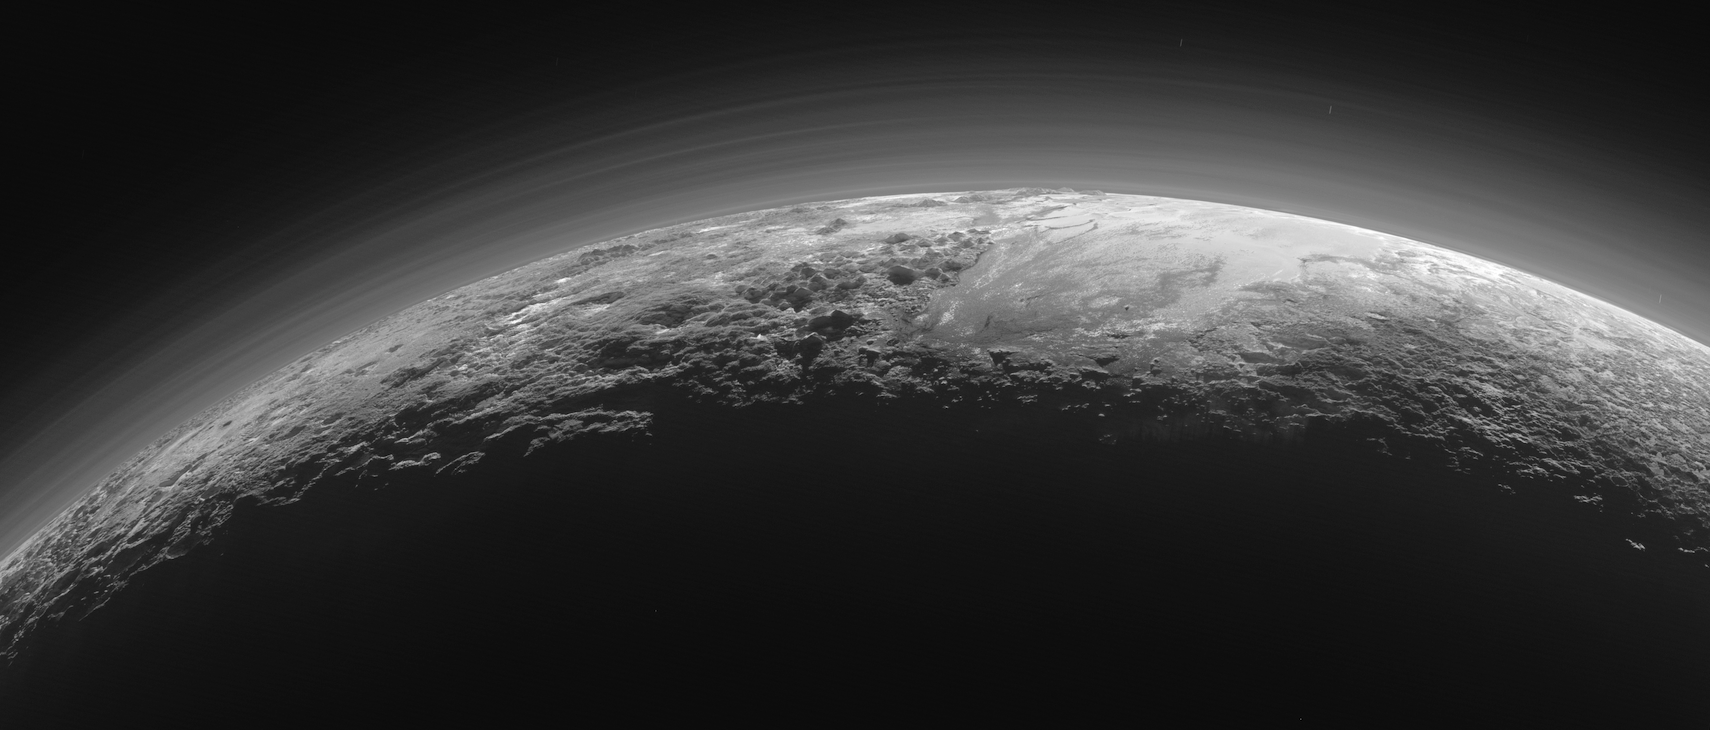 Stunning new panorama of Pluto backlit by the Sun, showing the icy plains, rugged mountains and hazes in the atmosphere. Image Credit: NASA/JHUAPL/SwRI